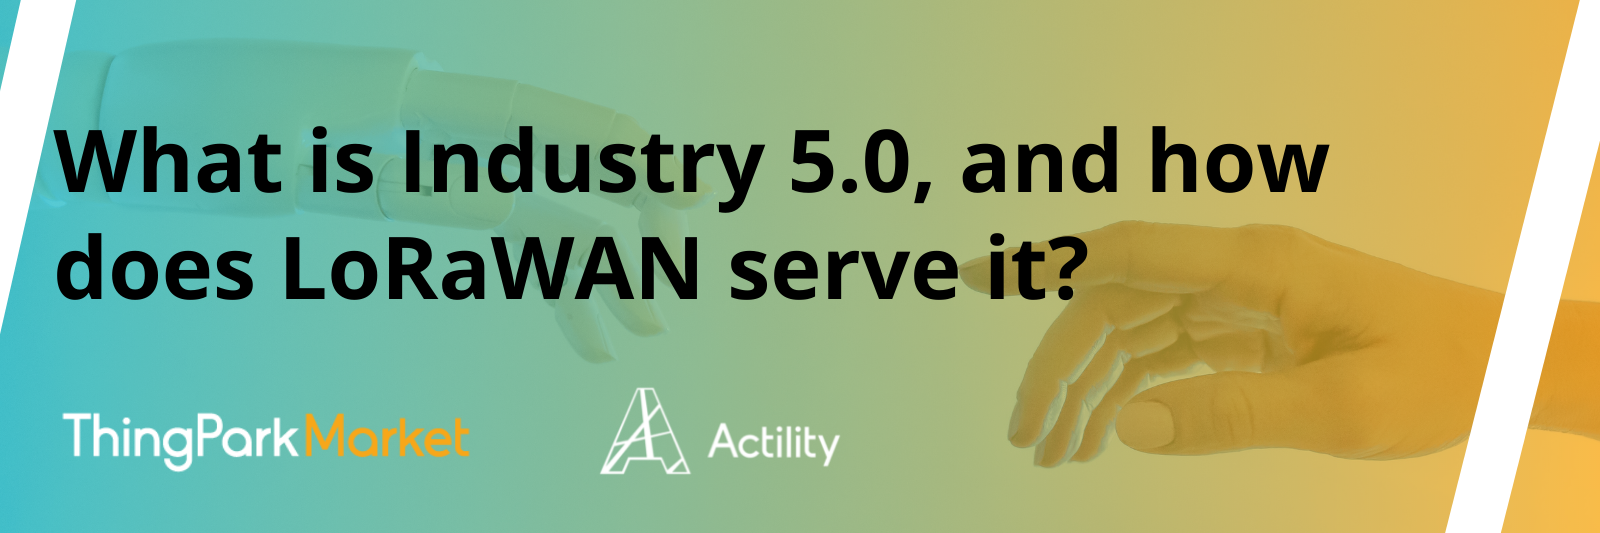 What is Industry 5.0 and how does LoRaWAN serve it?